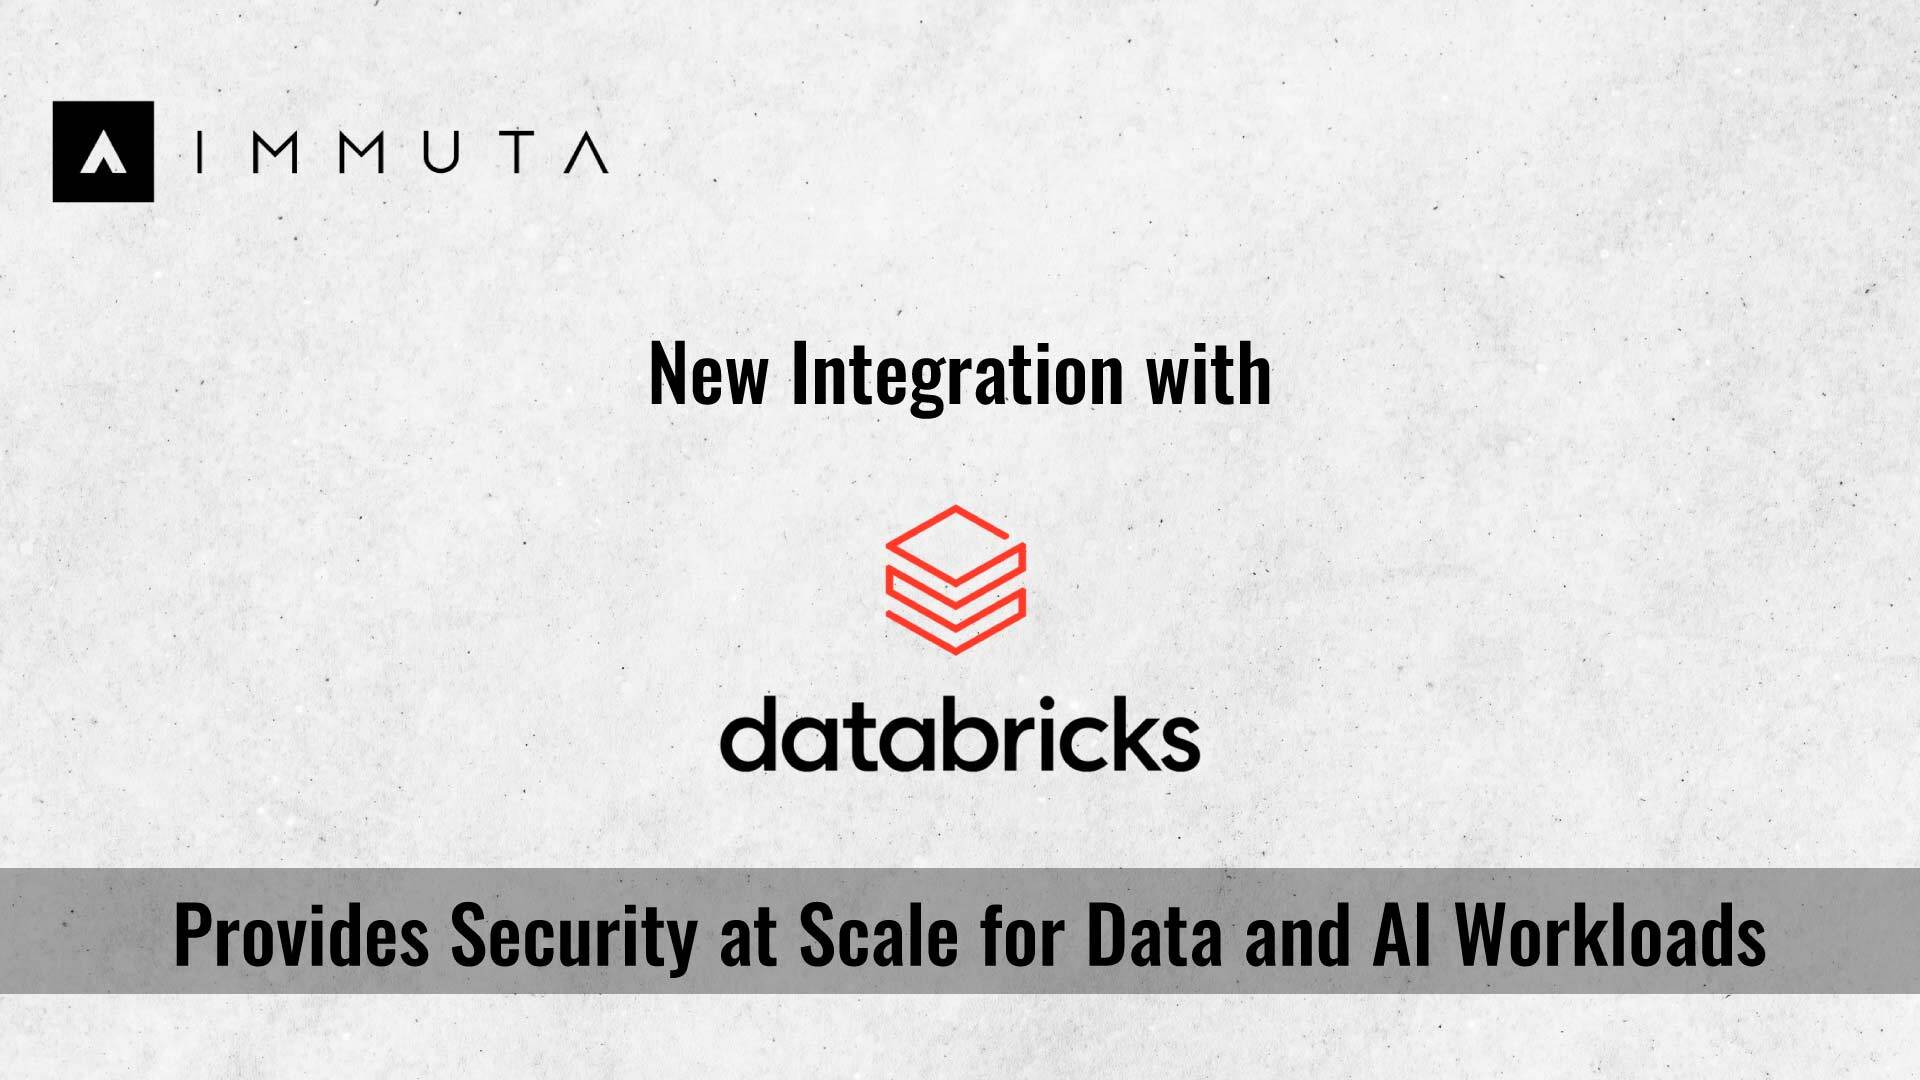 Immuta’s New Integration with Databricks Provides Security at Scale for Data and AI Workloads